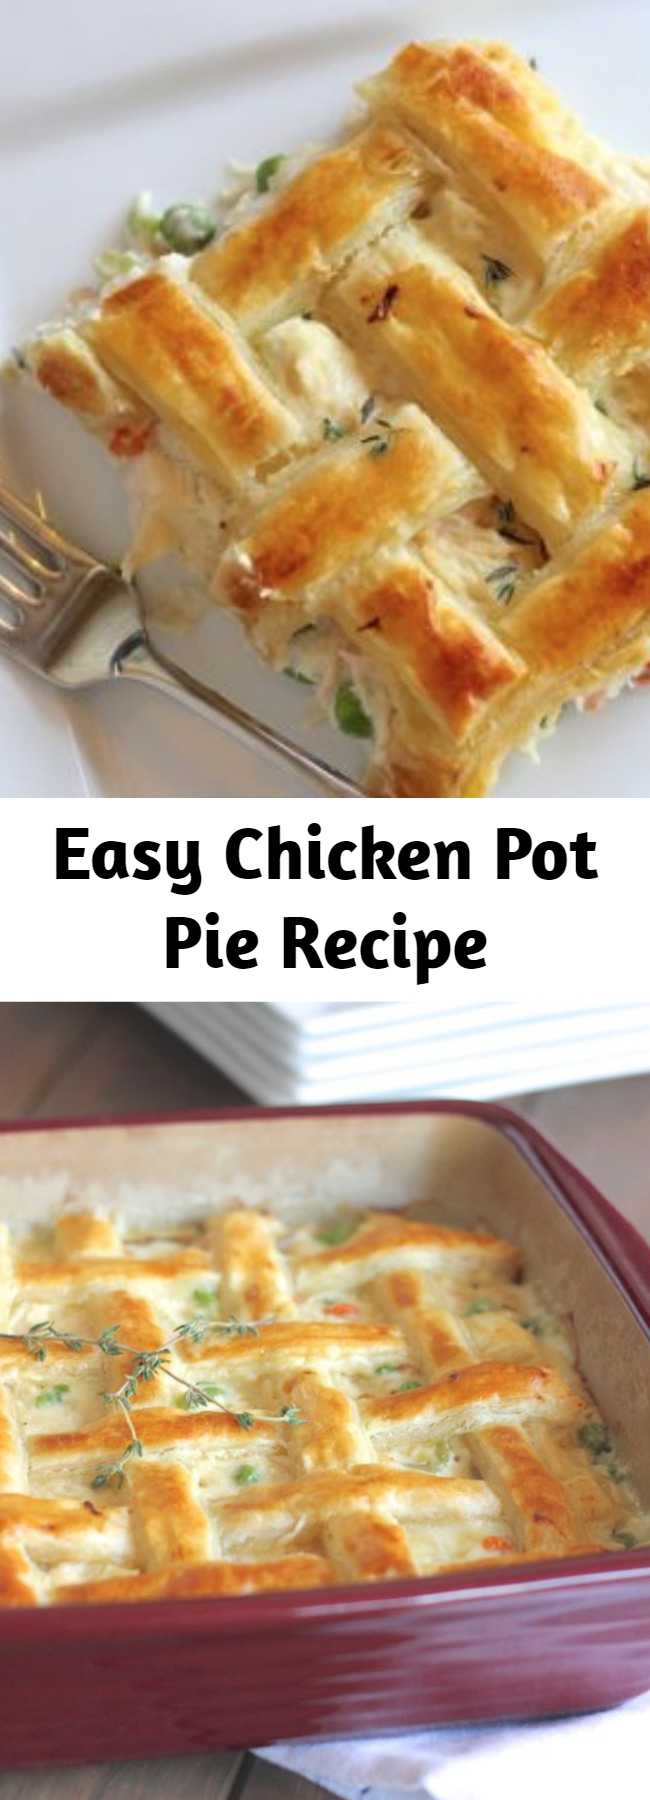 Easy Chicken Pot Pie Recipe - This Chicken Pot Pie has become one of my most popular recipes! It pairs really well with a nice green salad, and that fancy lattice crust makes dinner guests feel extra special. Don’t worry if you’ve never made one before, it’s really not too difficult.